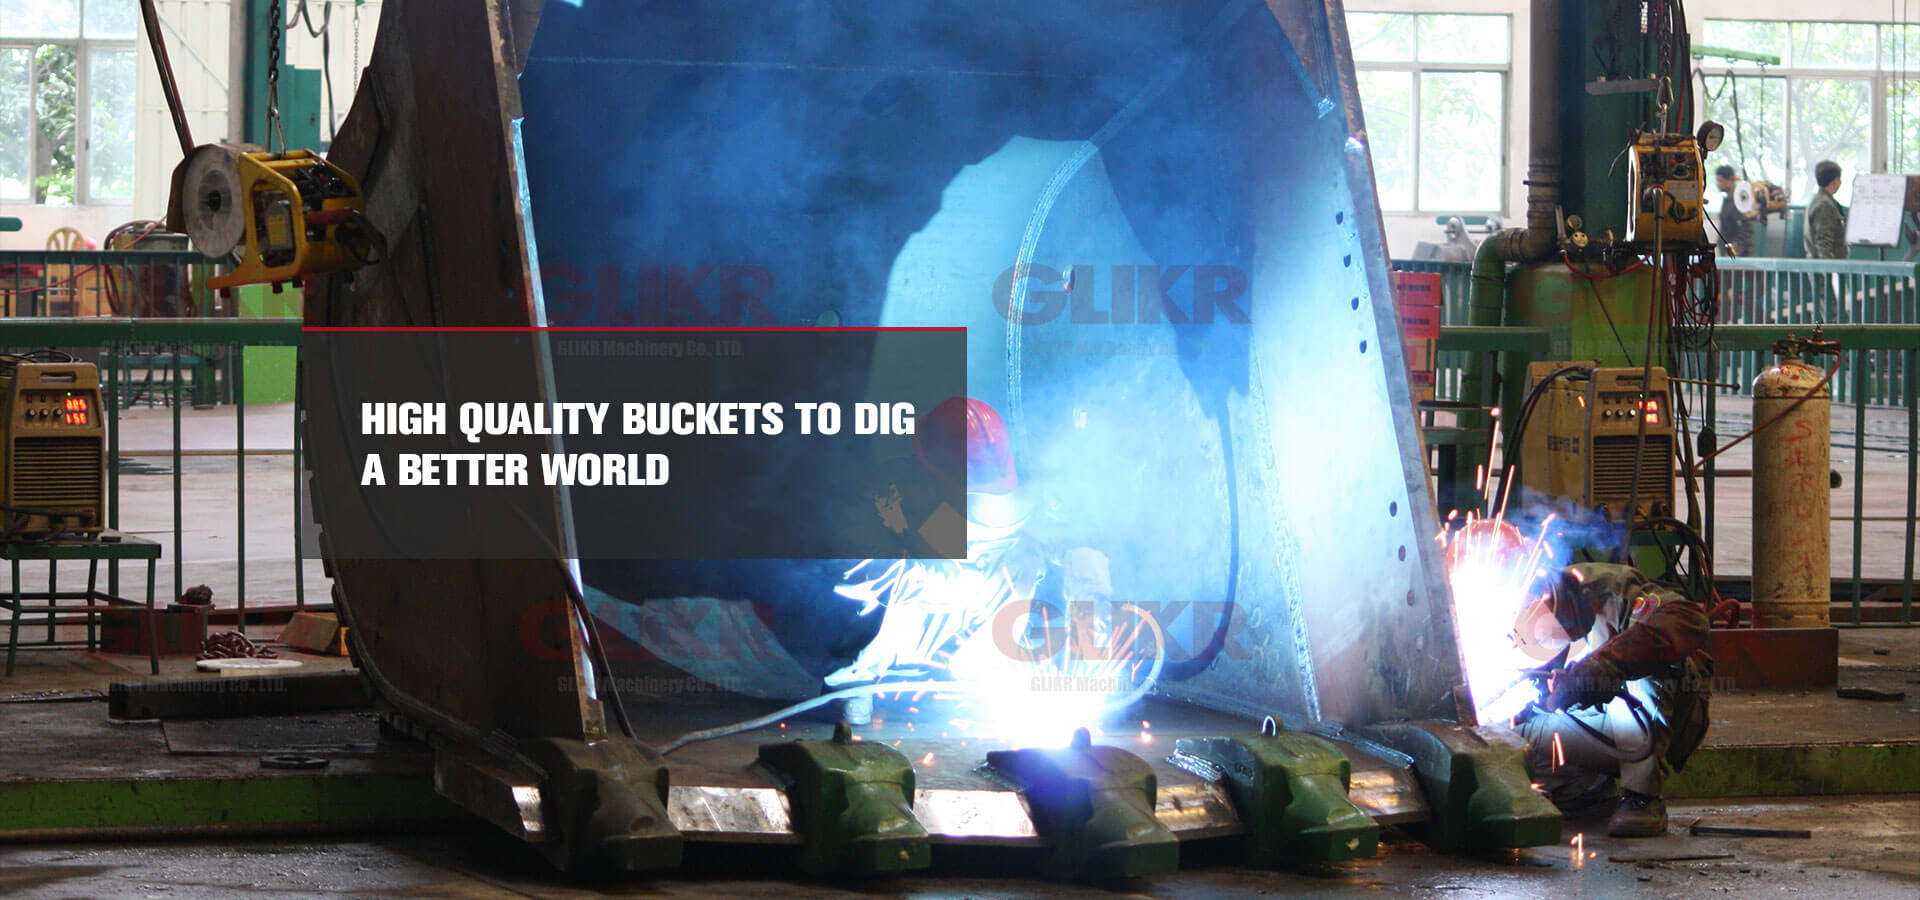 HIGH QUALITY BUCKETS TO DIG A BETTER WORLD!